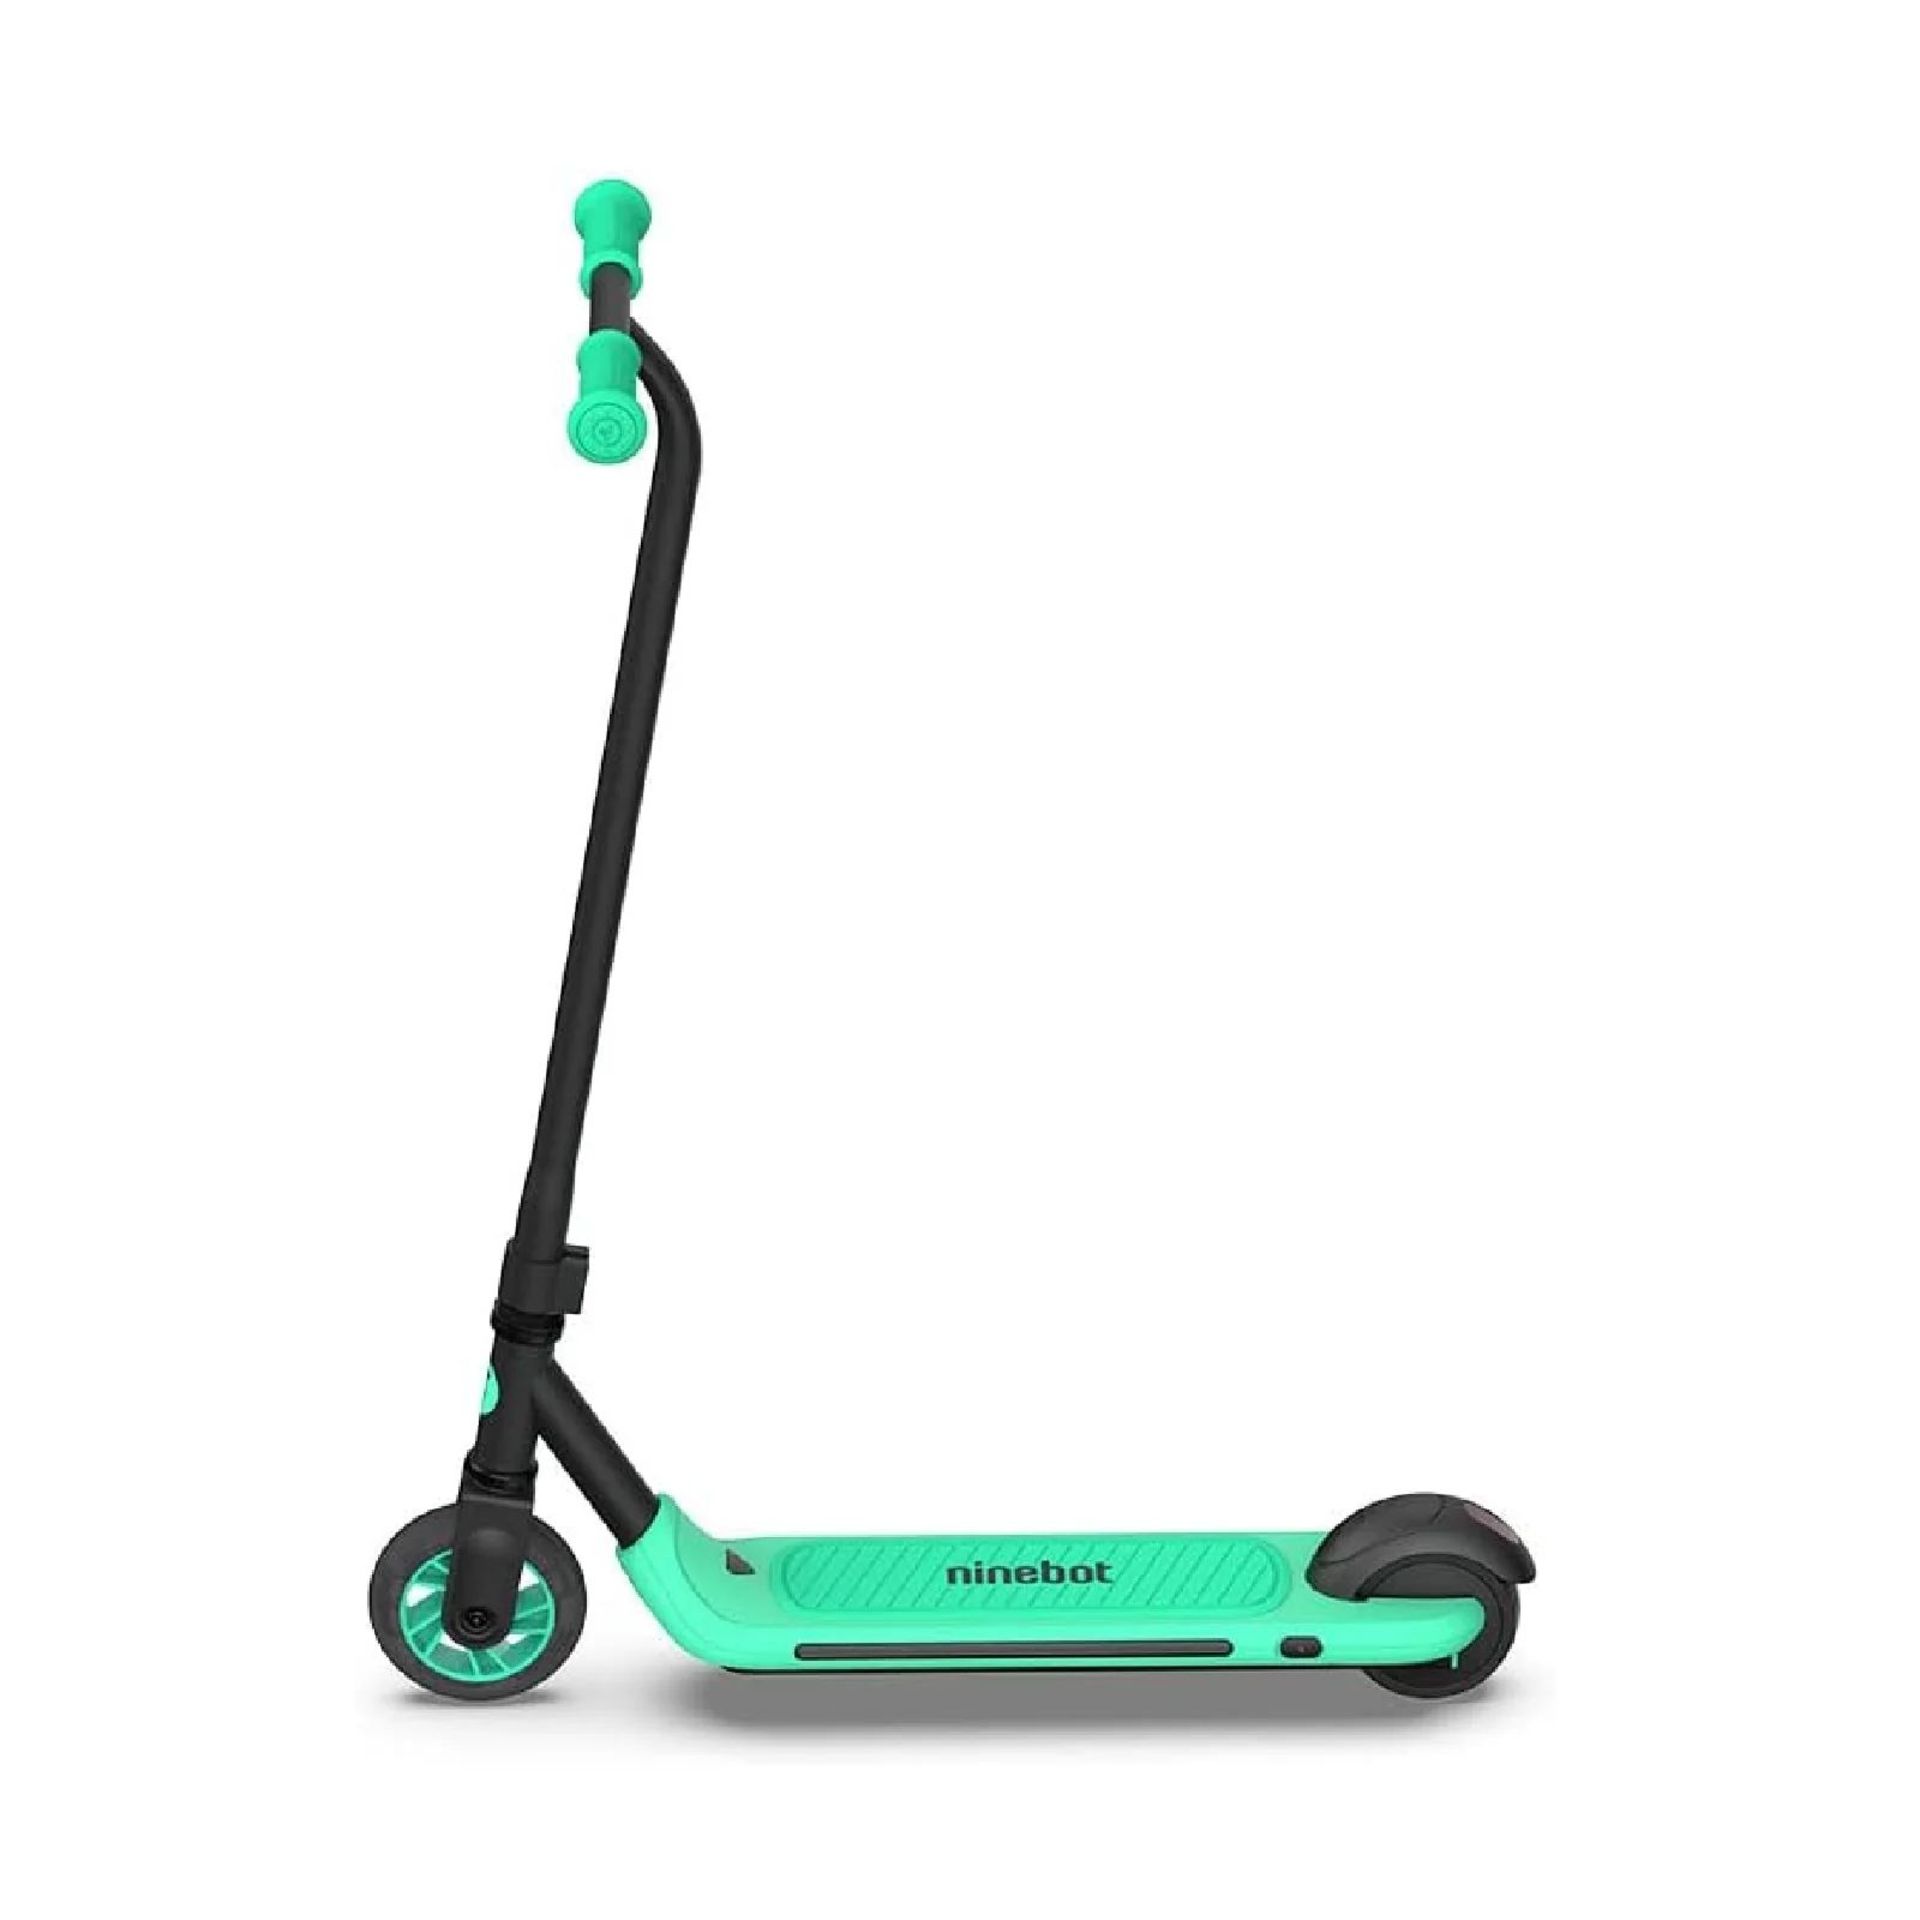 SEGWAY NINEBOT ELECTRIC ASSIST E-KICK SCOOTER (FACTORY RECERTIFIED - 30 DAY WARRANTY INCLUDED) - Image 2 of 3